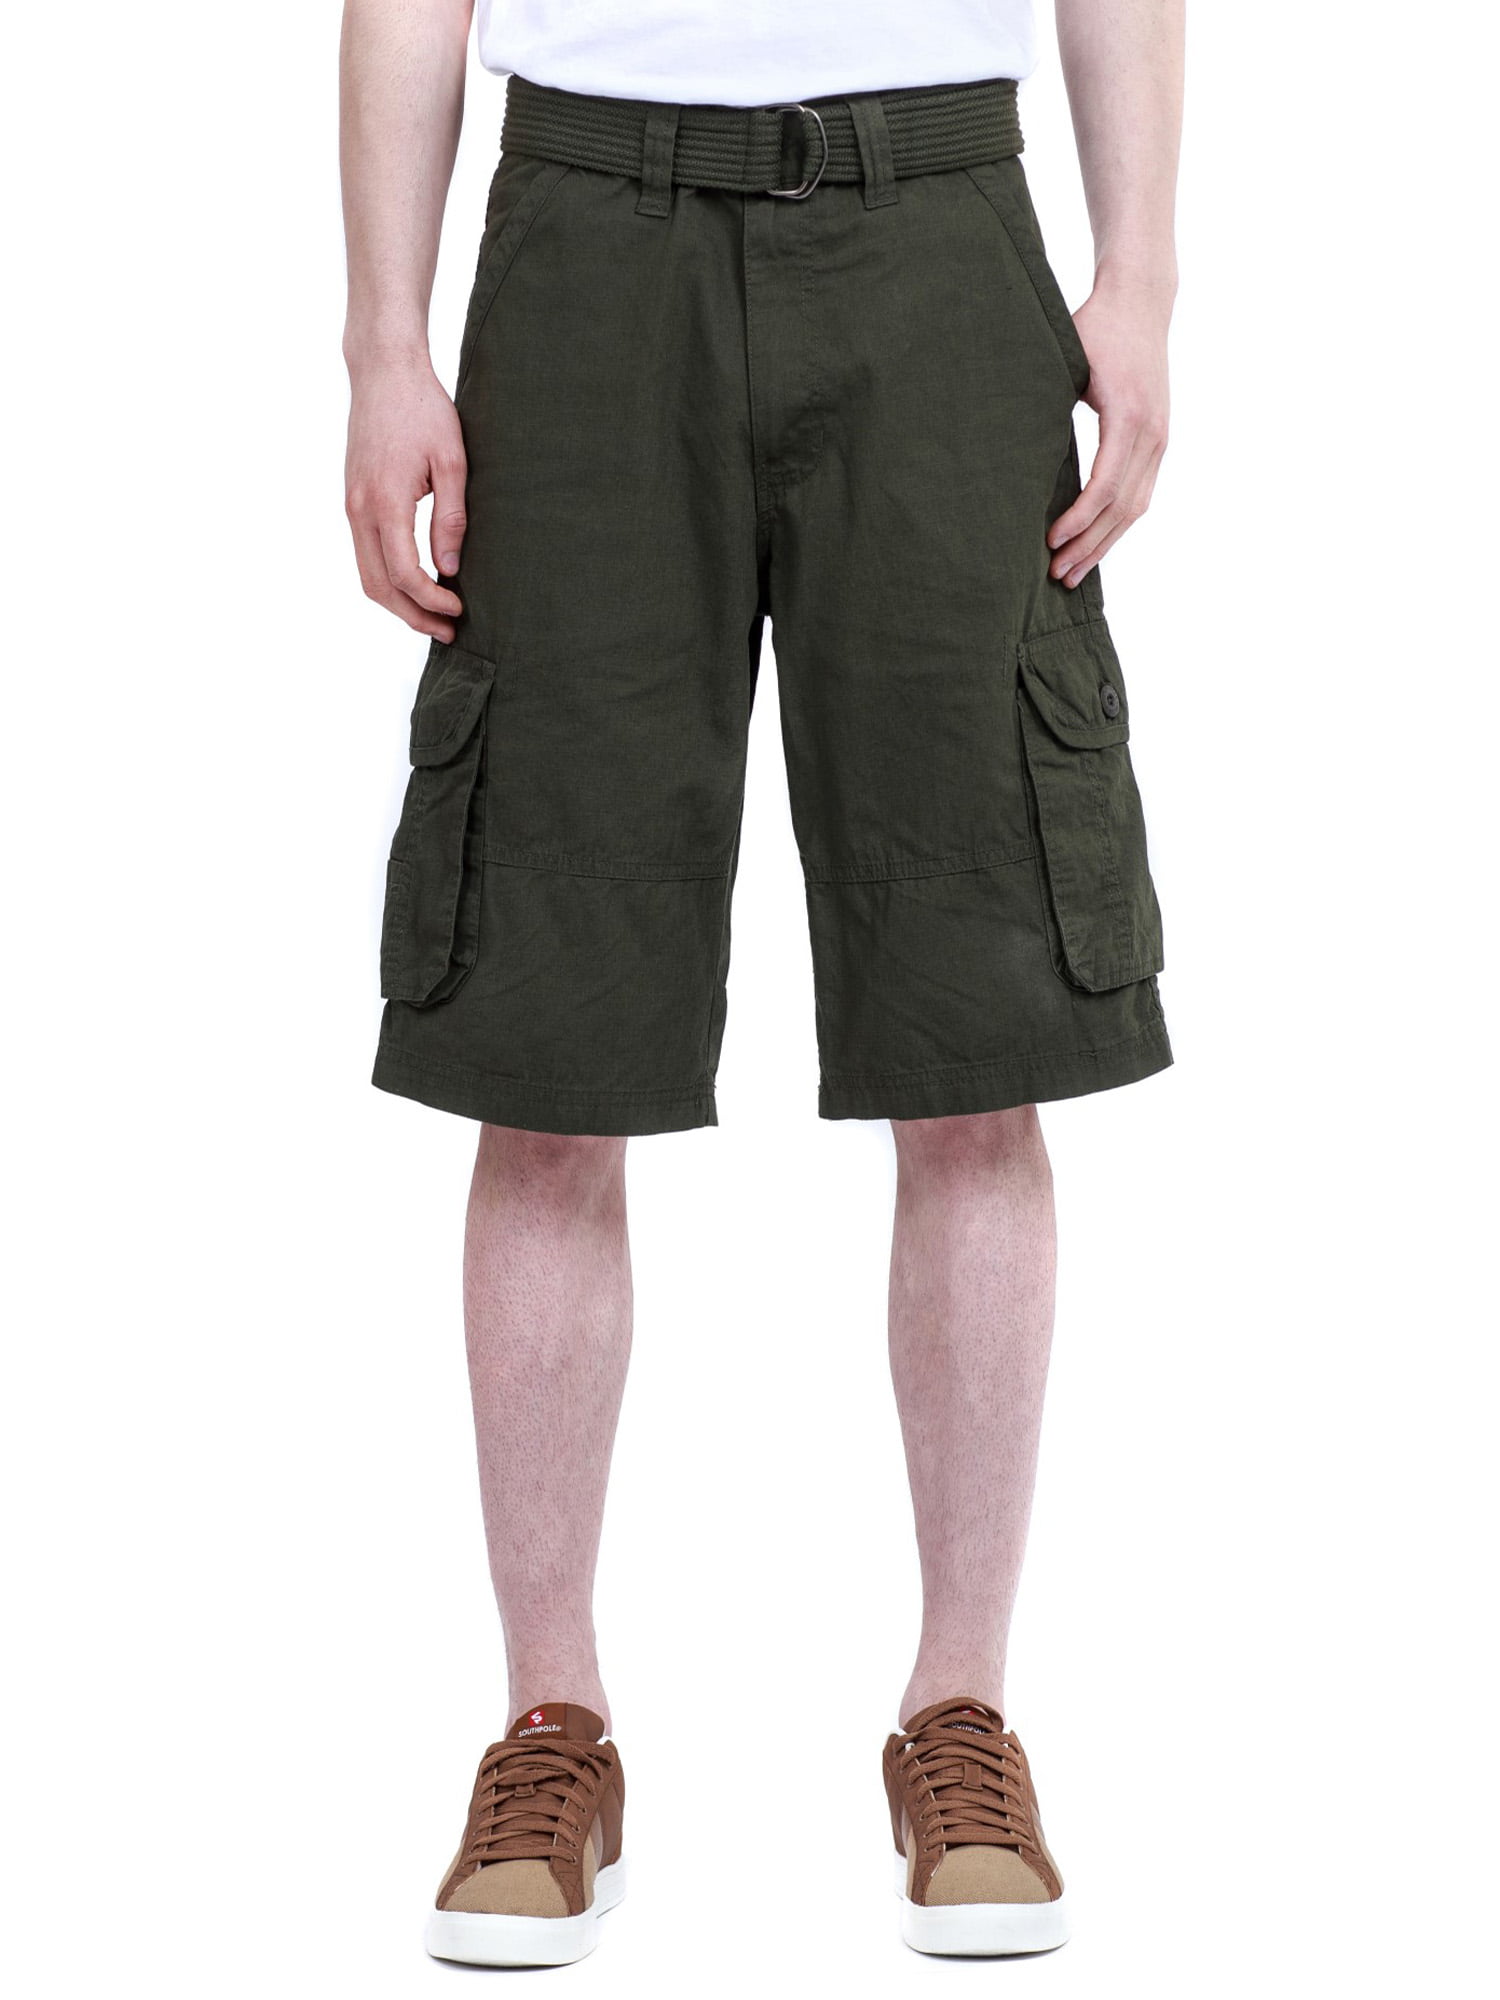 Southpole Mens Short Twill Short Ripped and Repaired 